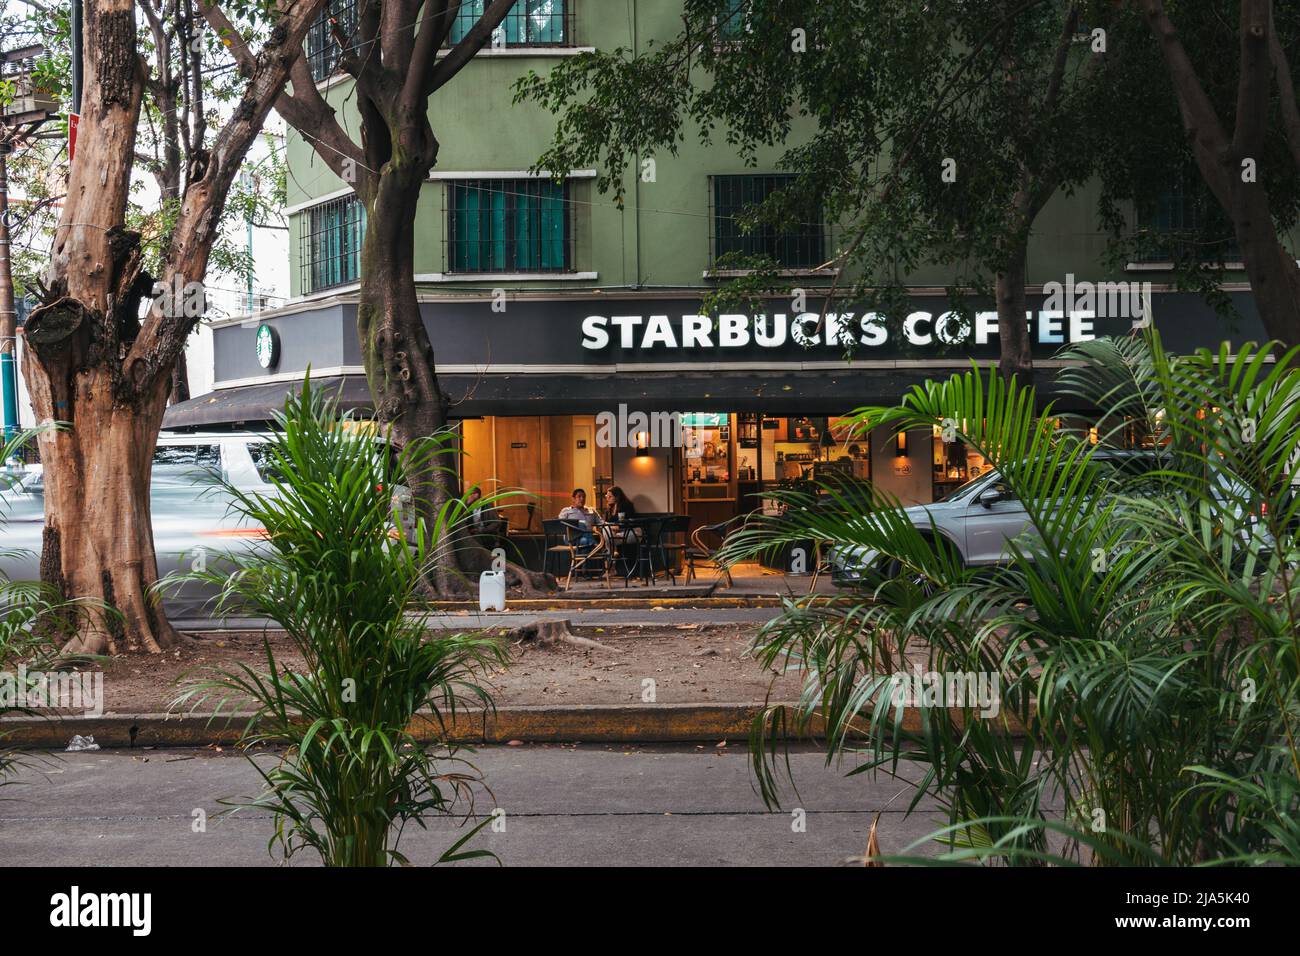 a Starbucks Coffee shop in the leafy inner-city suburb of Roma Norte, Mexico City Stock Photo